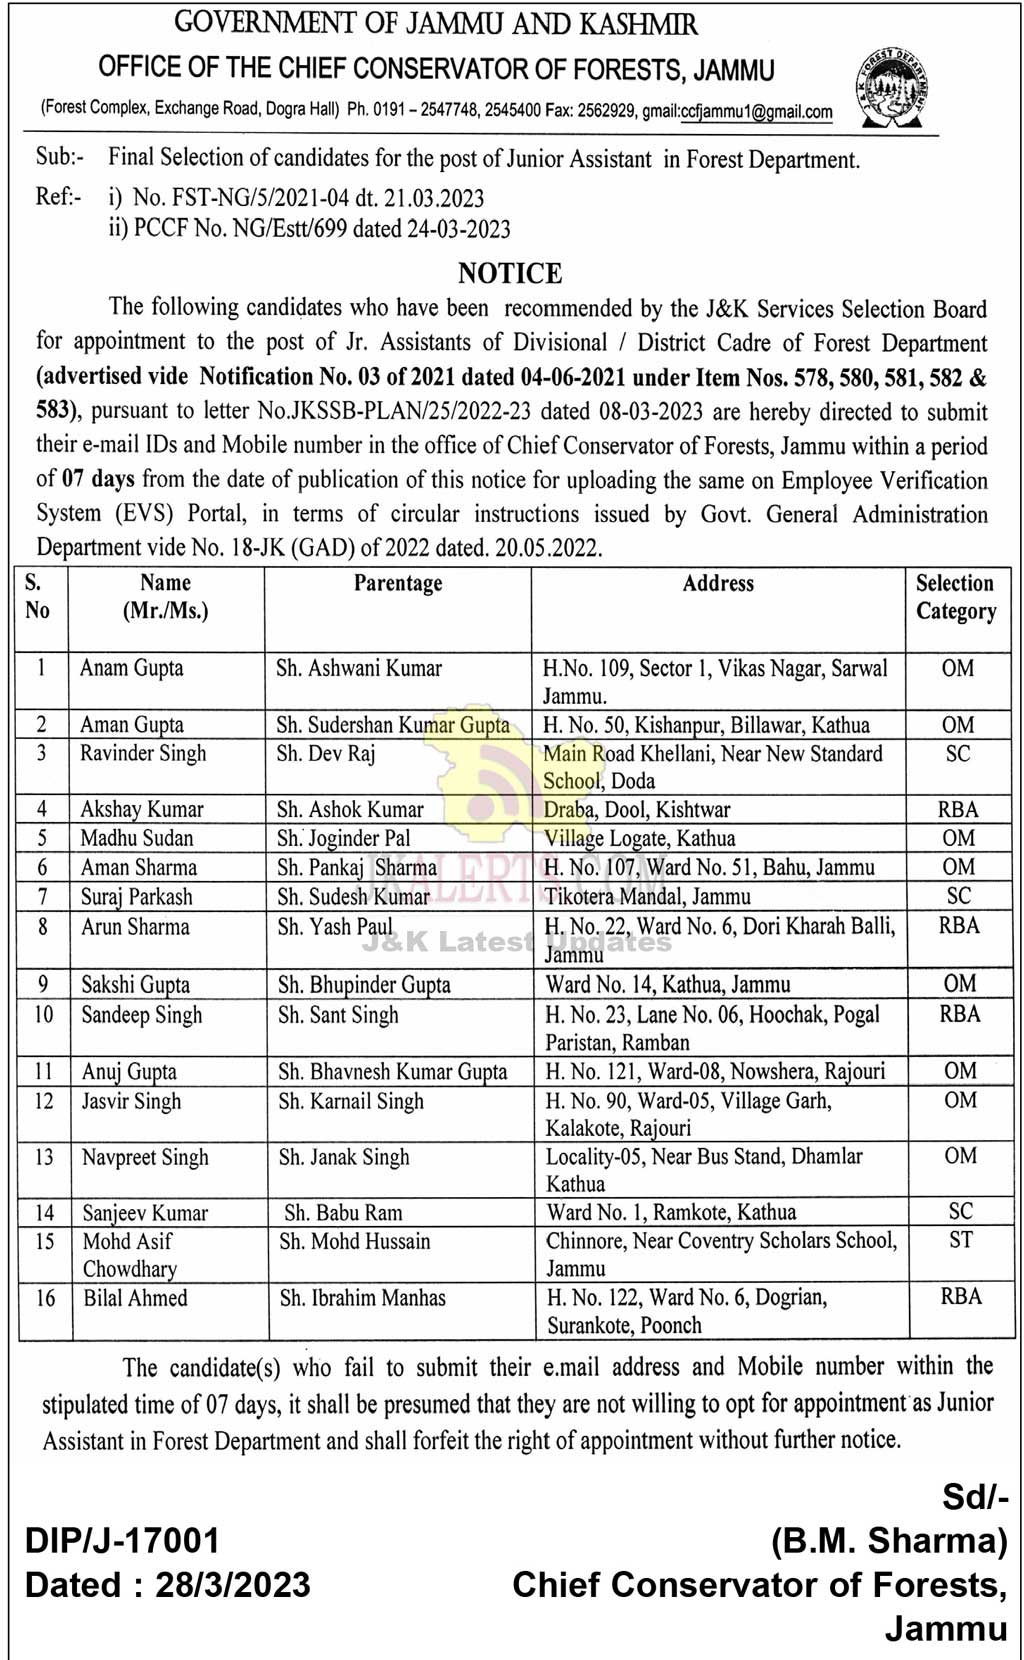 Final Selection List of Junior Assistant in Forest Department.